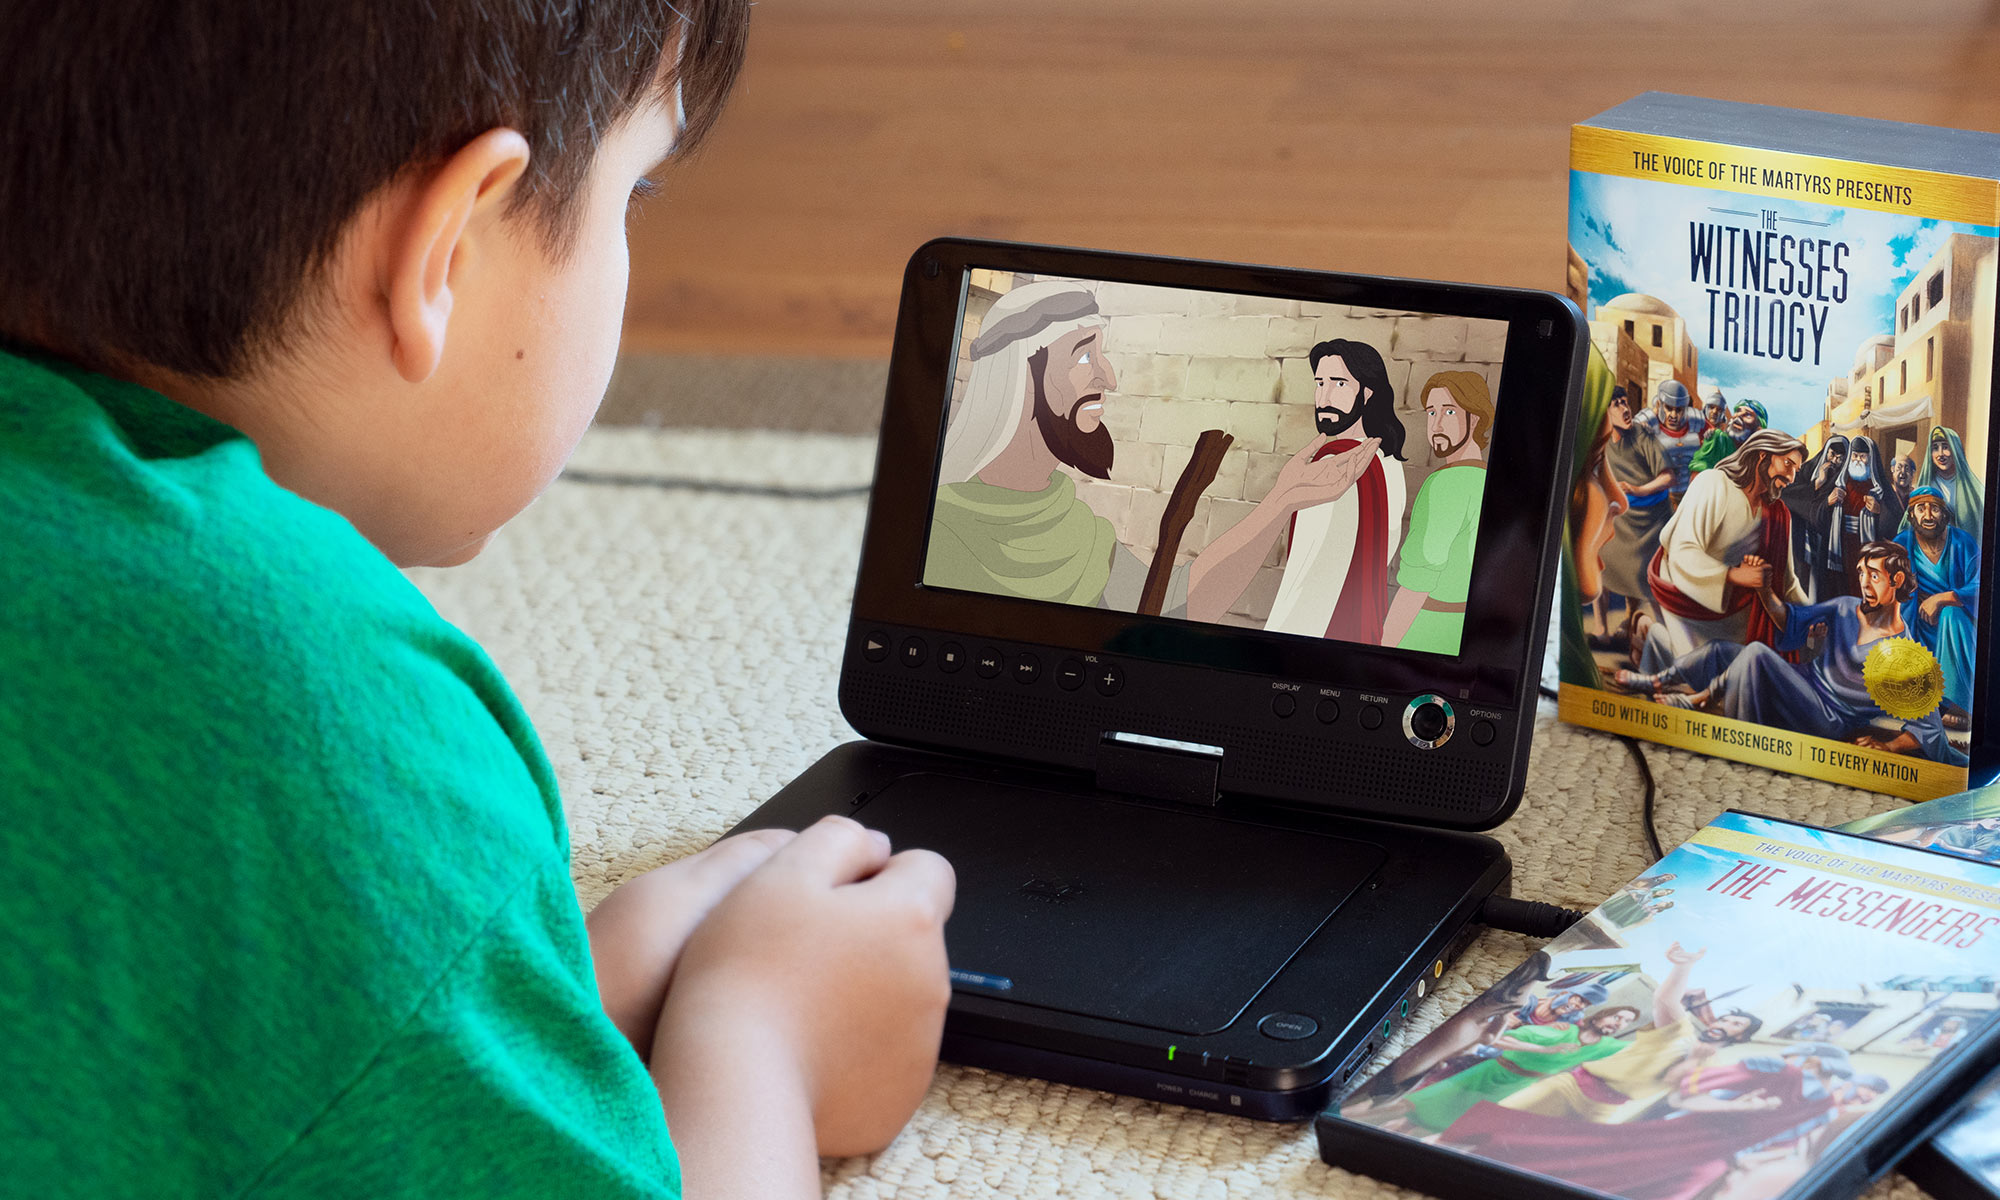 Kid watching animated movie on portable player